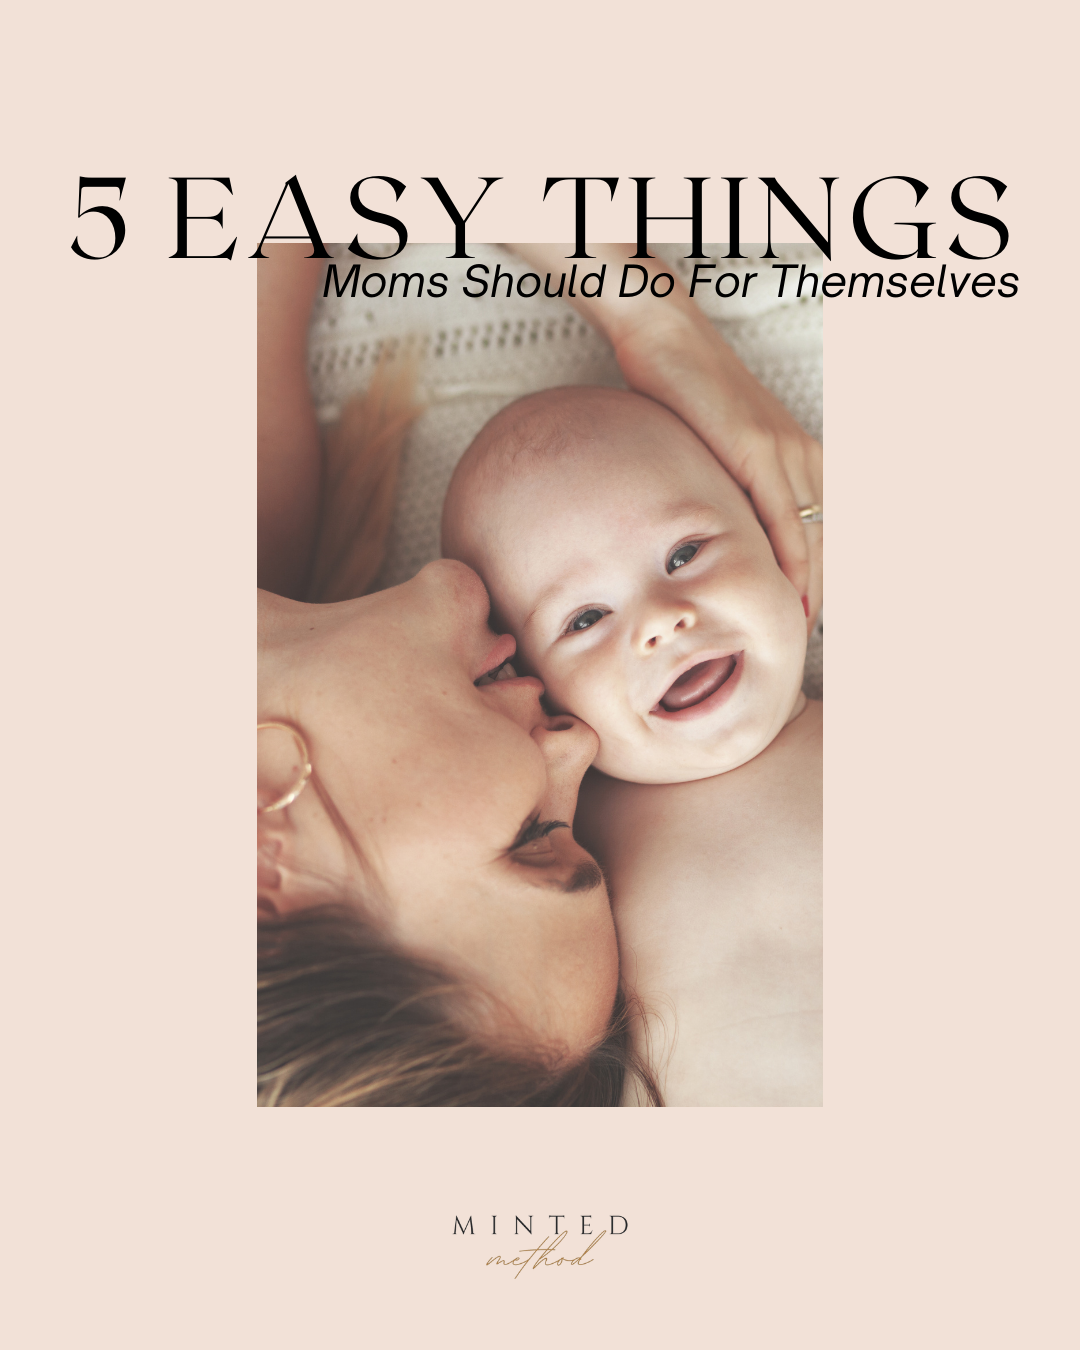 5 Easy Things Moms Should Do For Themselves